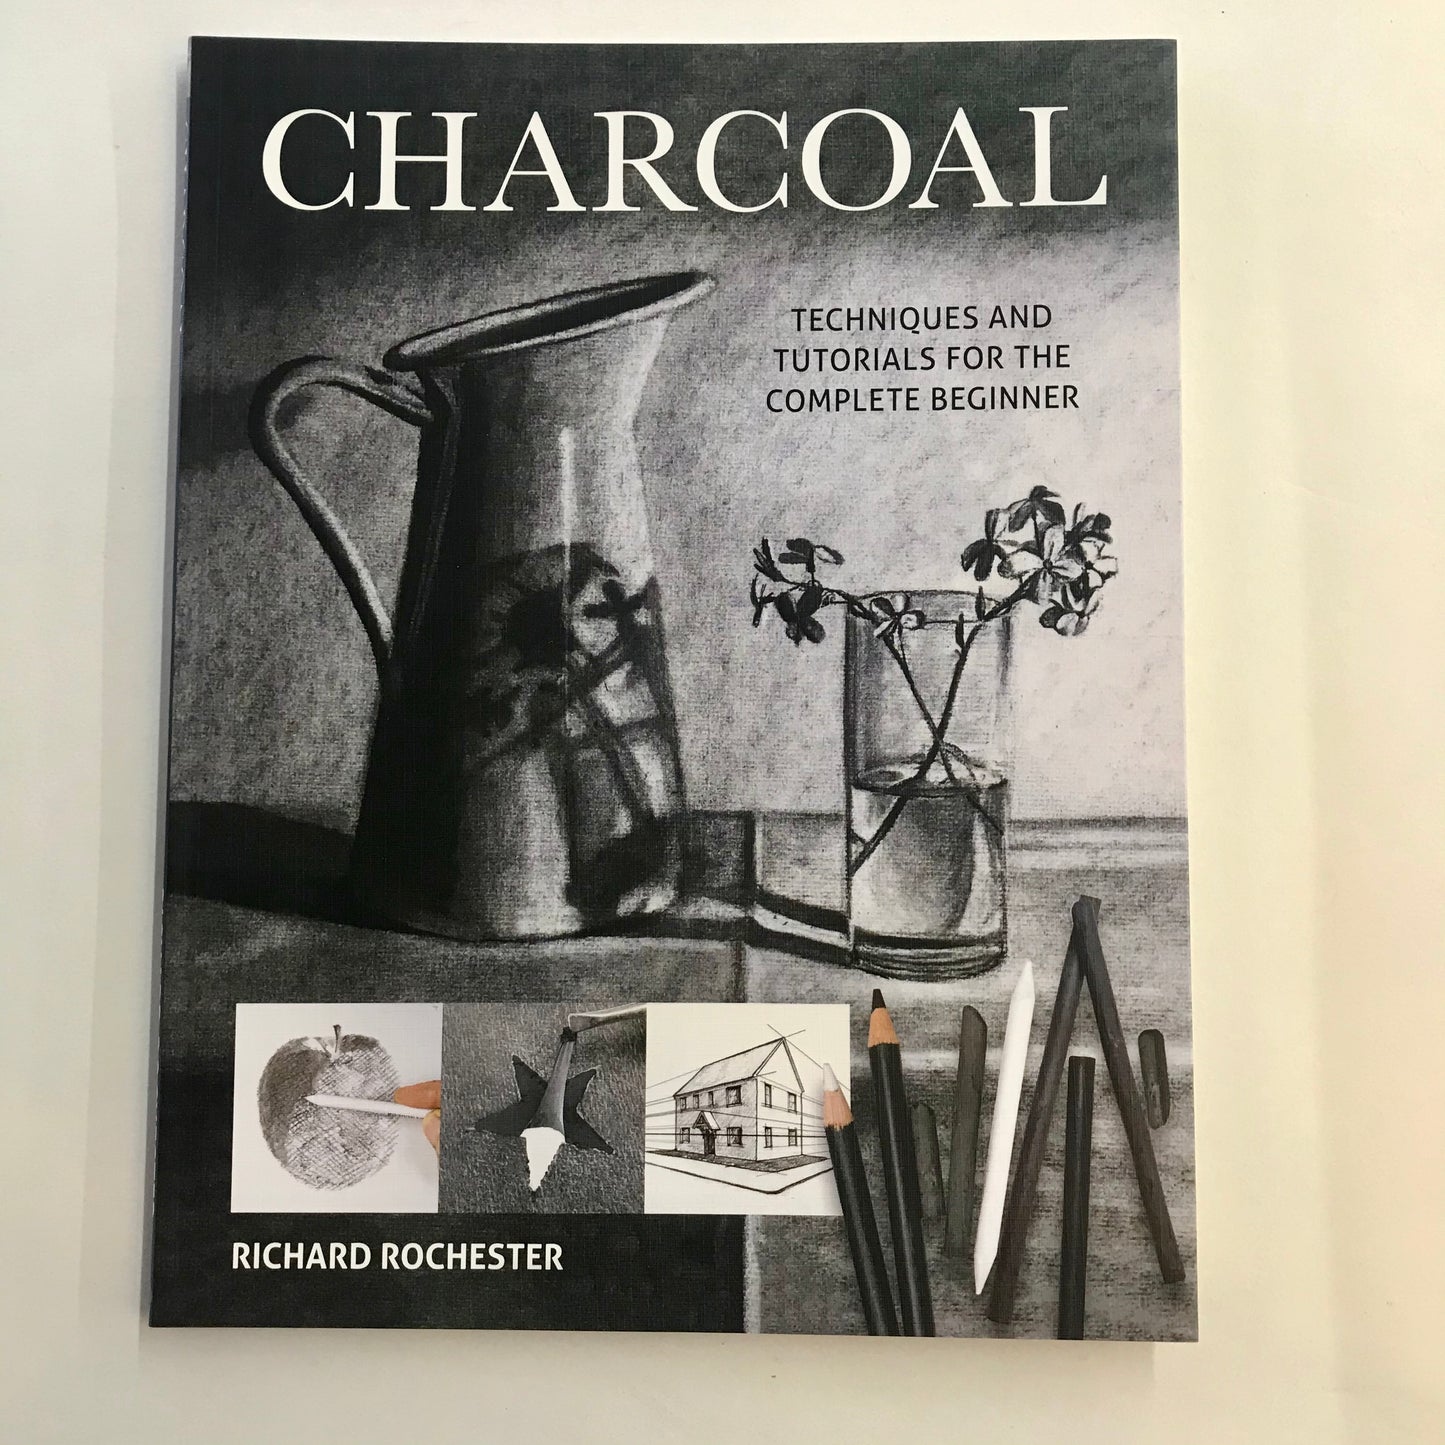 Charcoal - Techniques and tutorials for complete beginners